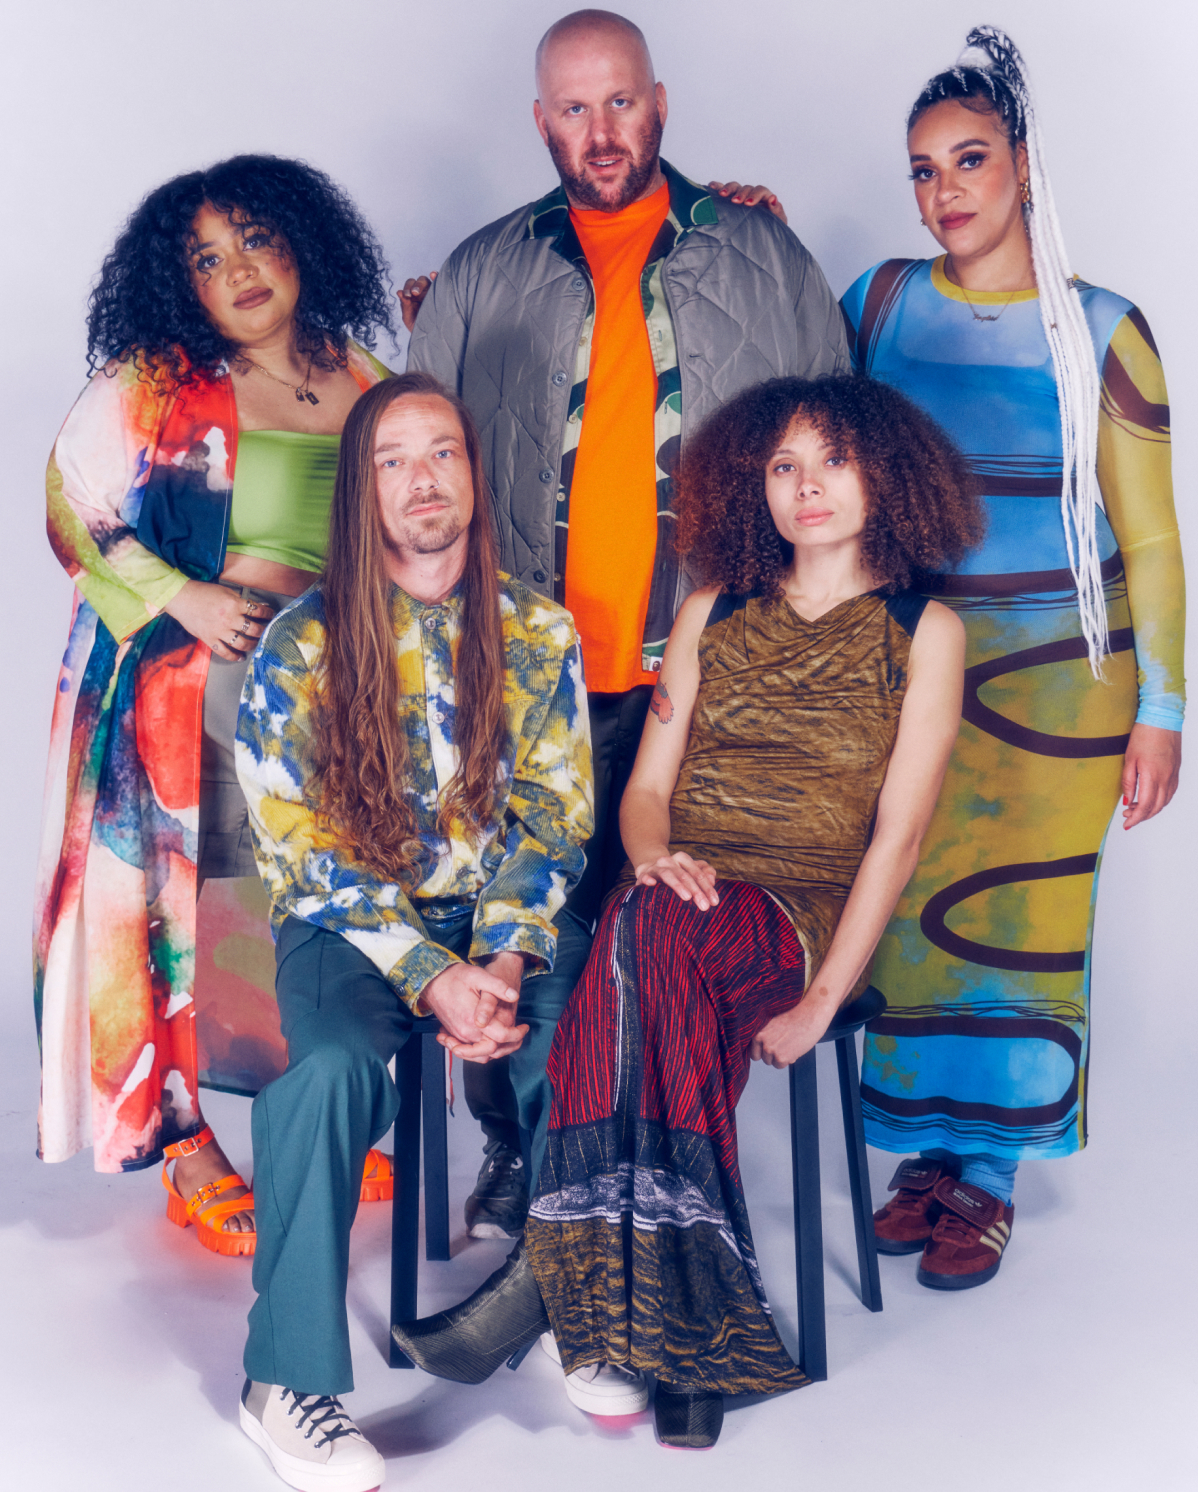 Five people pose together against a light background. One person is seated with others standing behind. Their outfits are colorful and varied, featuring patterns, bright colors, and unique styles. They display a mix of expressions, from smiles to calm and confident looks.